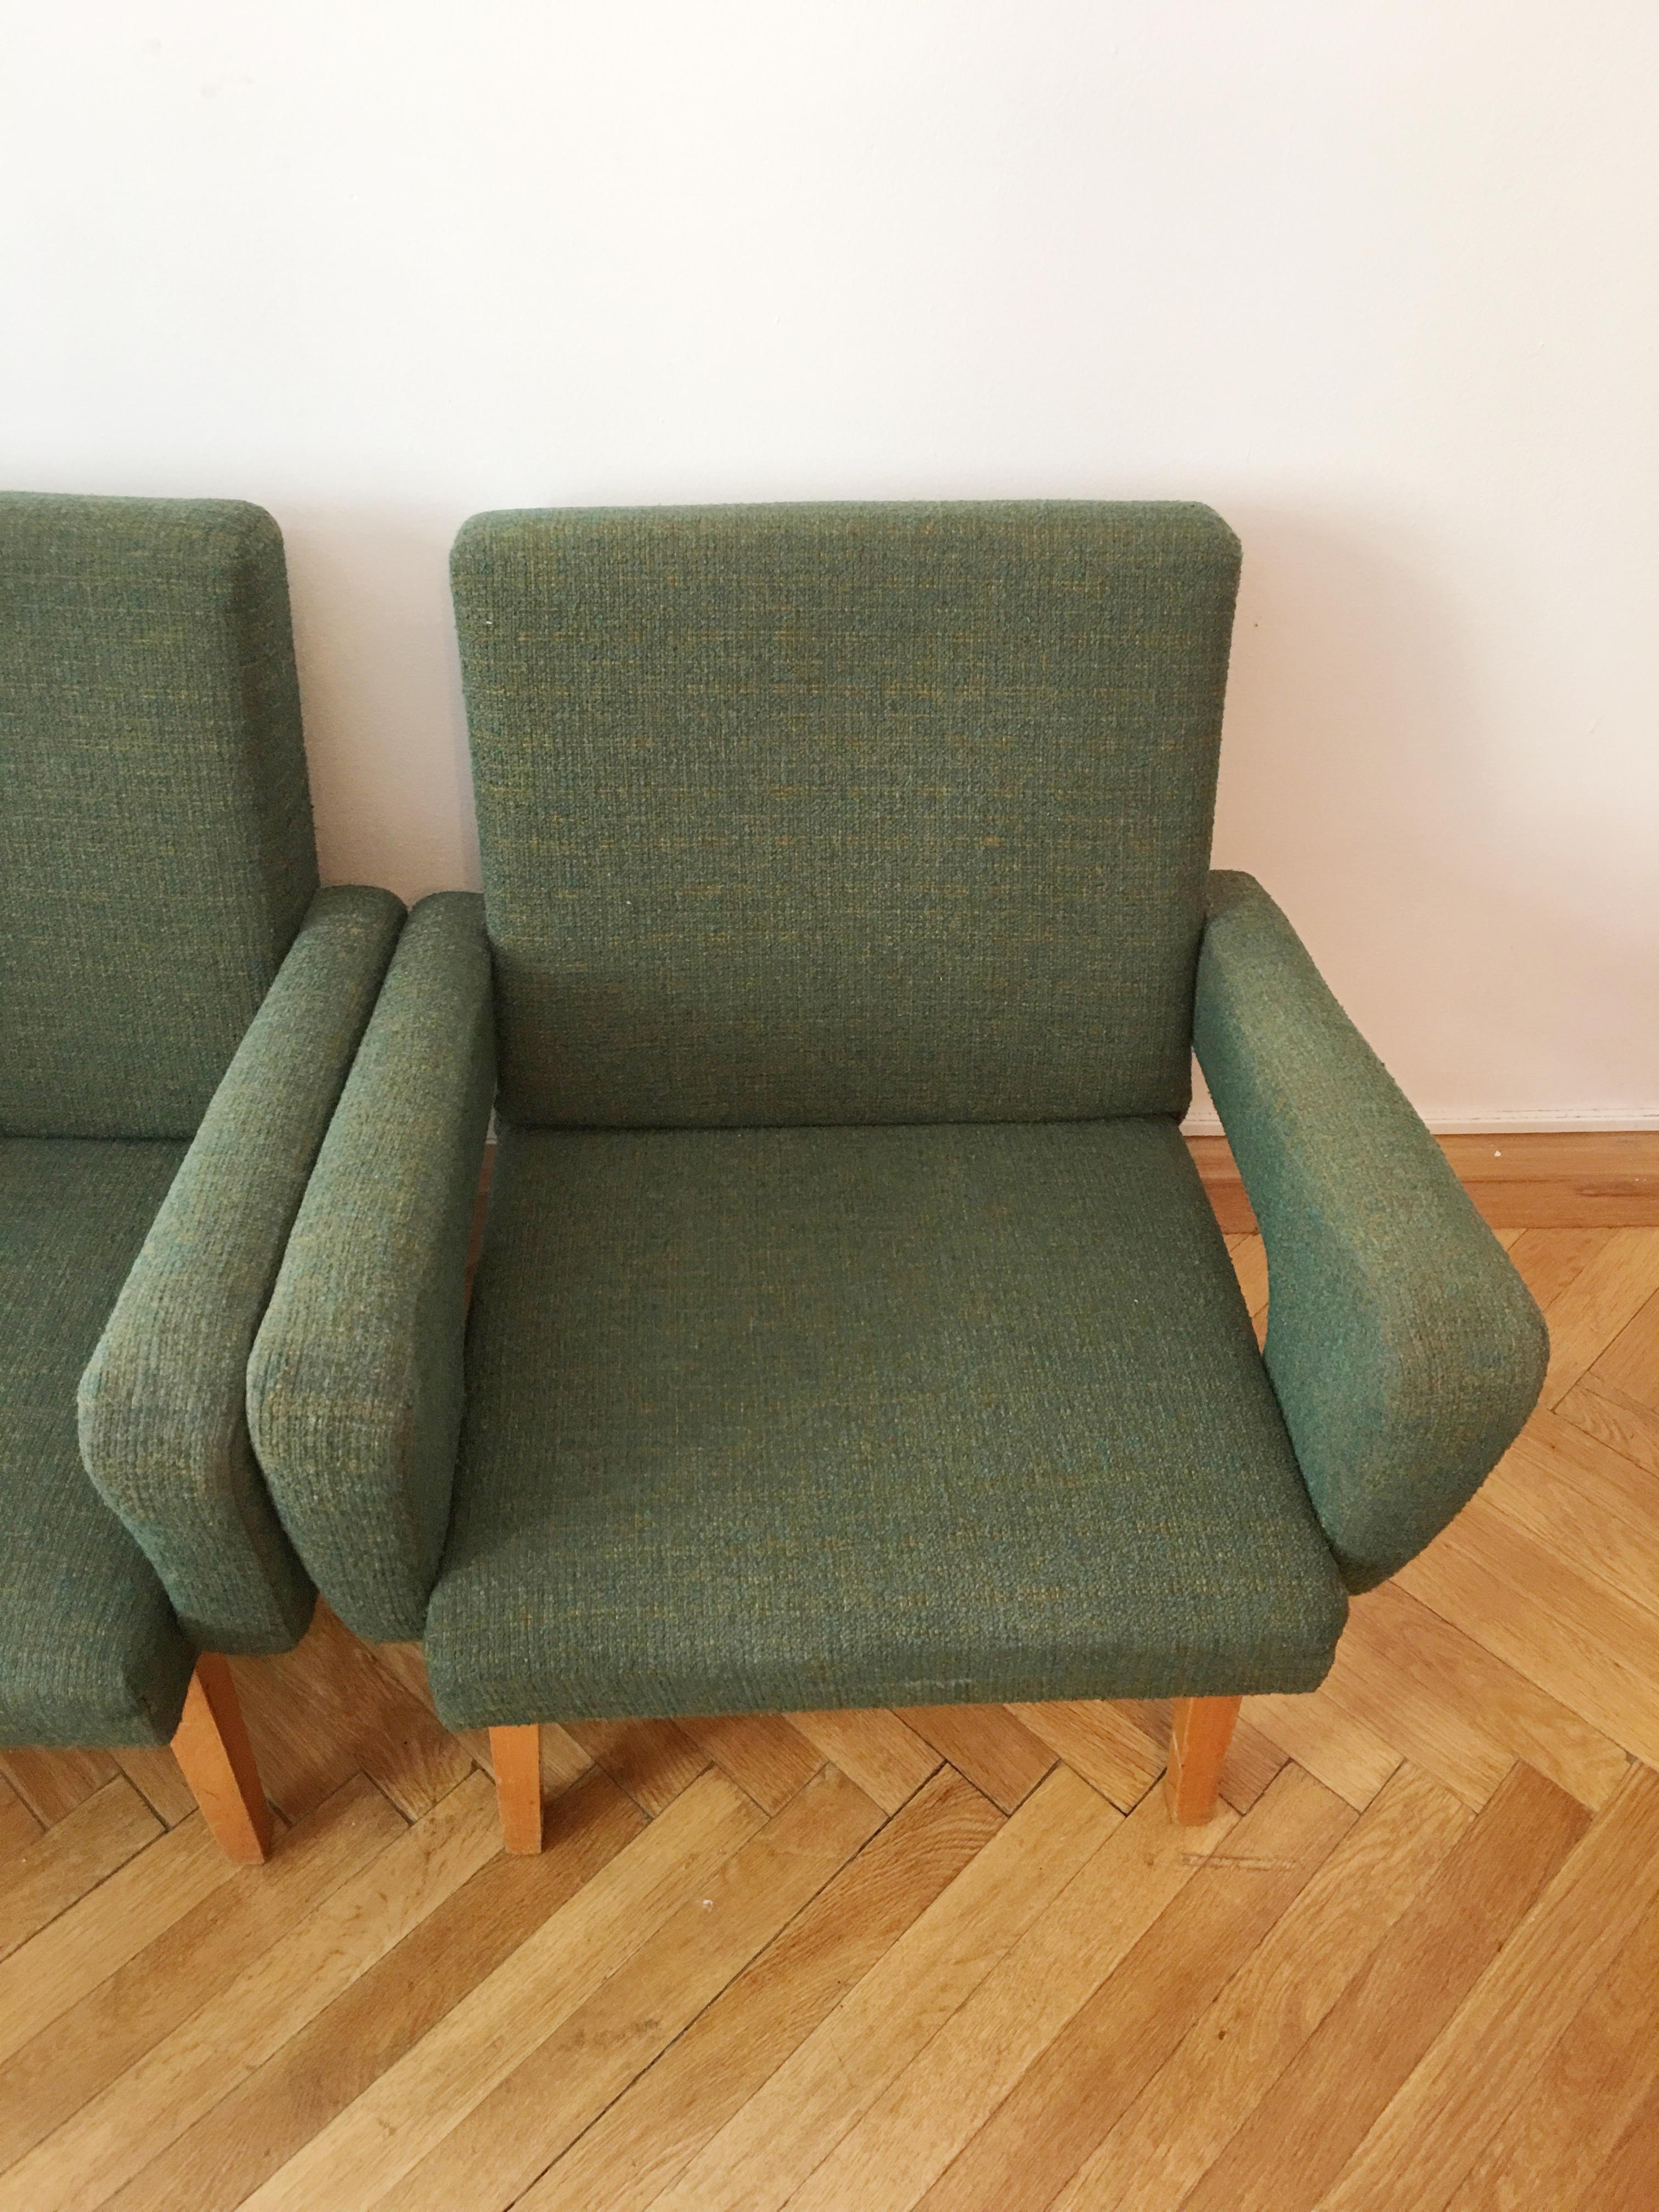 Green Vintage Rocket Armchairs by Jitona, 1960s, Pair In Good Condition For Sale In Prague, CZ